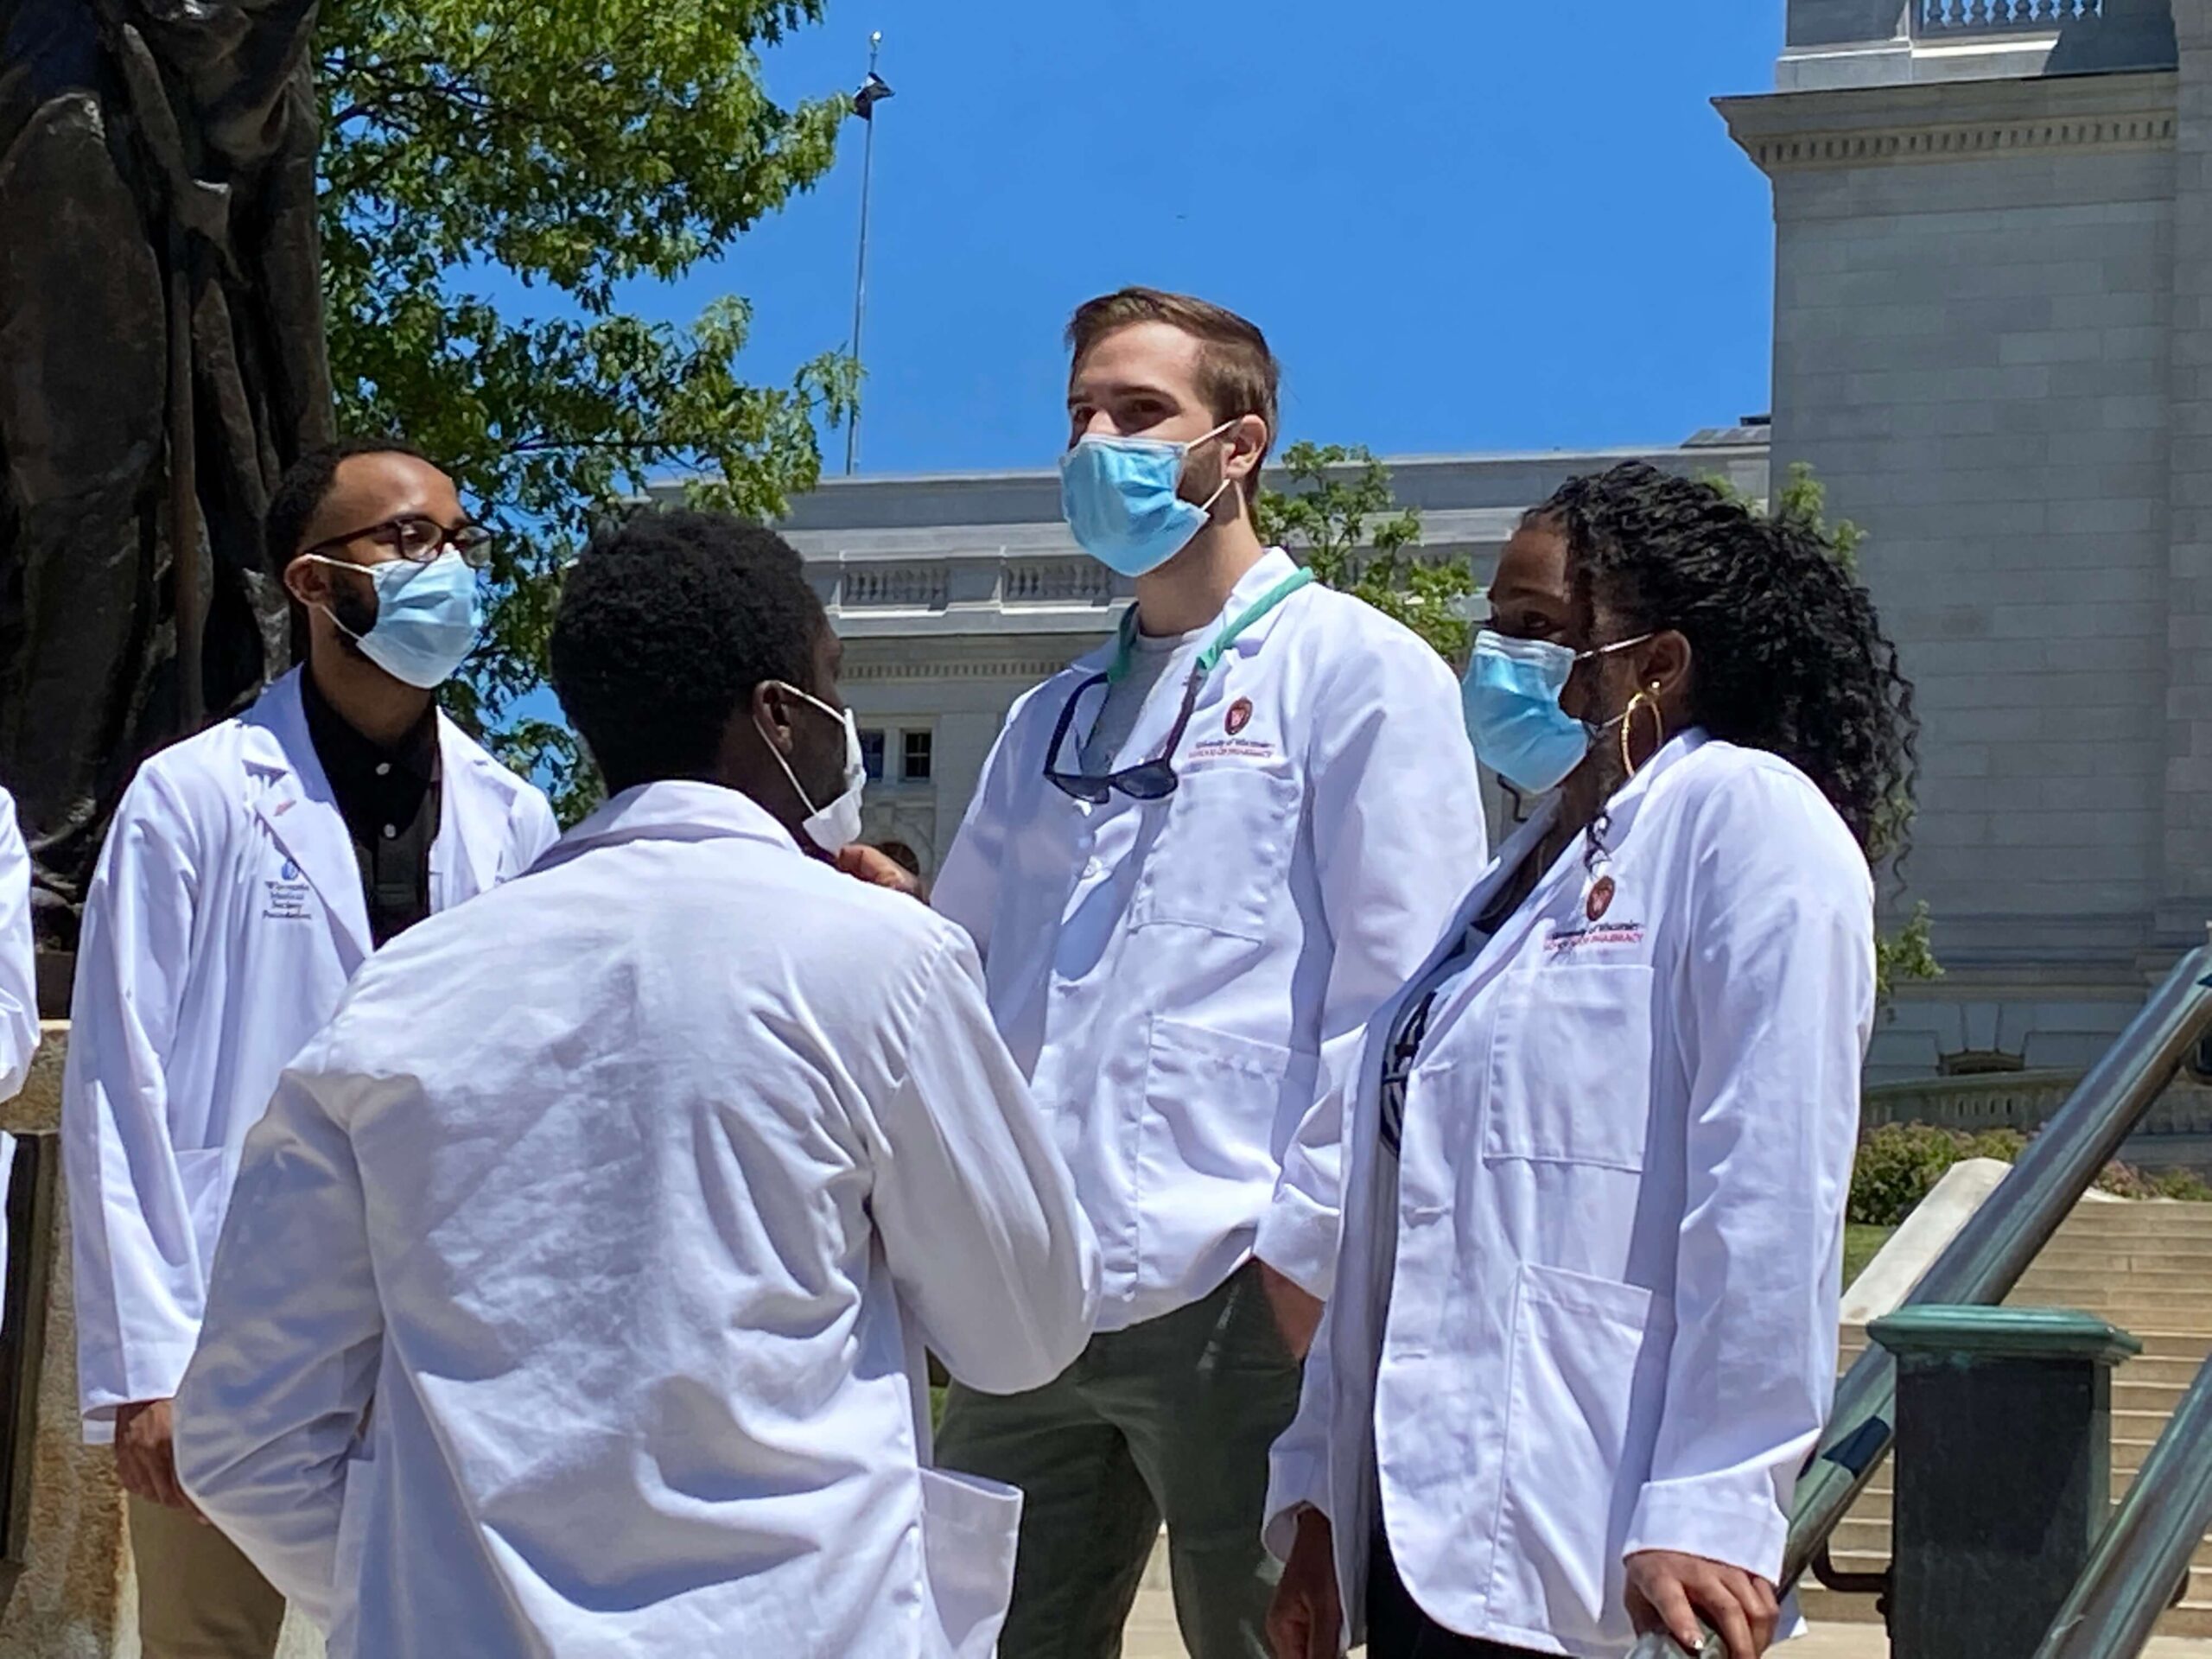 students walking for "White coats for Black Lives' march